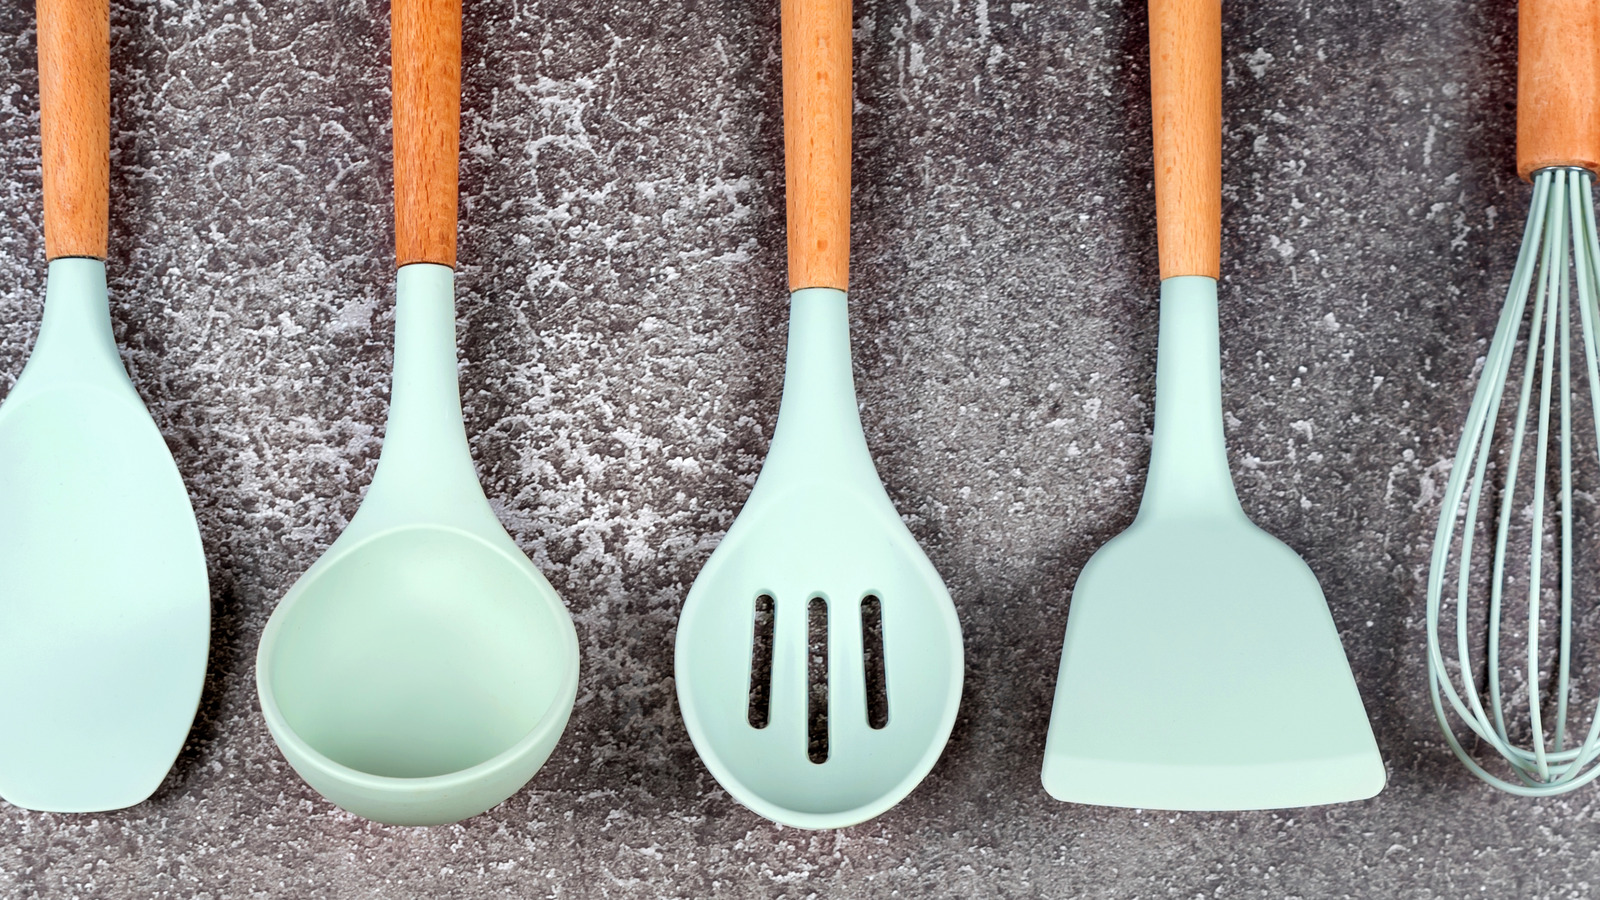 What Makes High-Heat Spatulas A Must-Have Cooking Tool